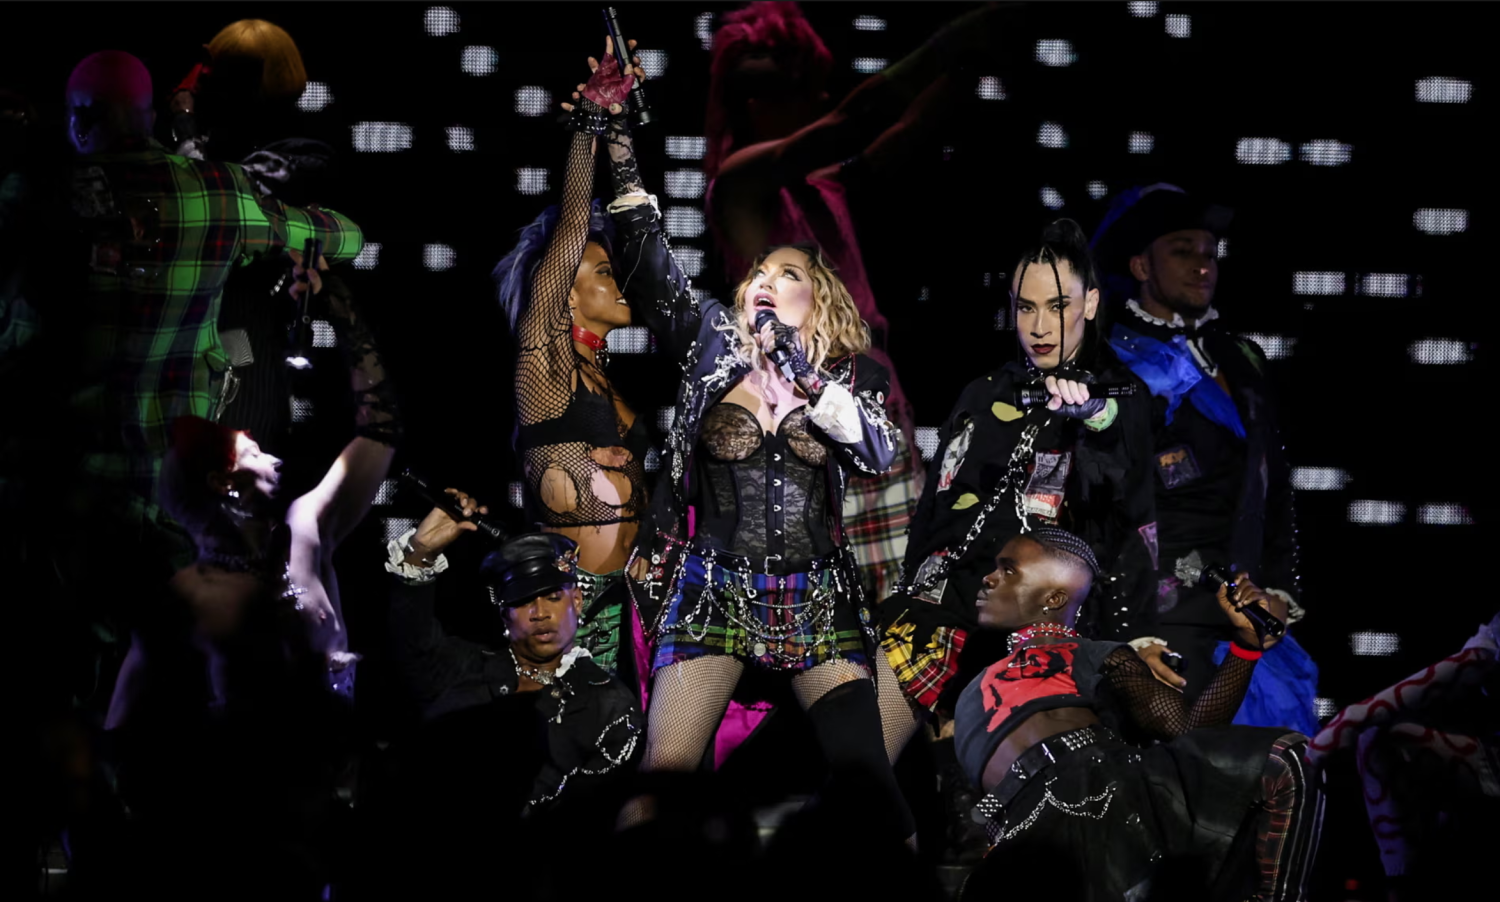 Madonna was on stage for more than two hours, performing songs including Like a Prayer, Vogue and Express Yourself. Photograph: Pilar Olivares/Reuters